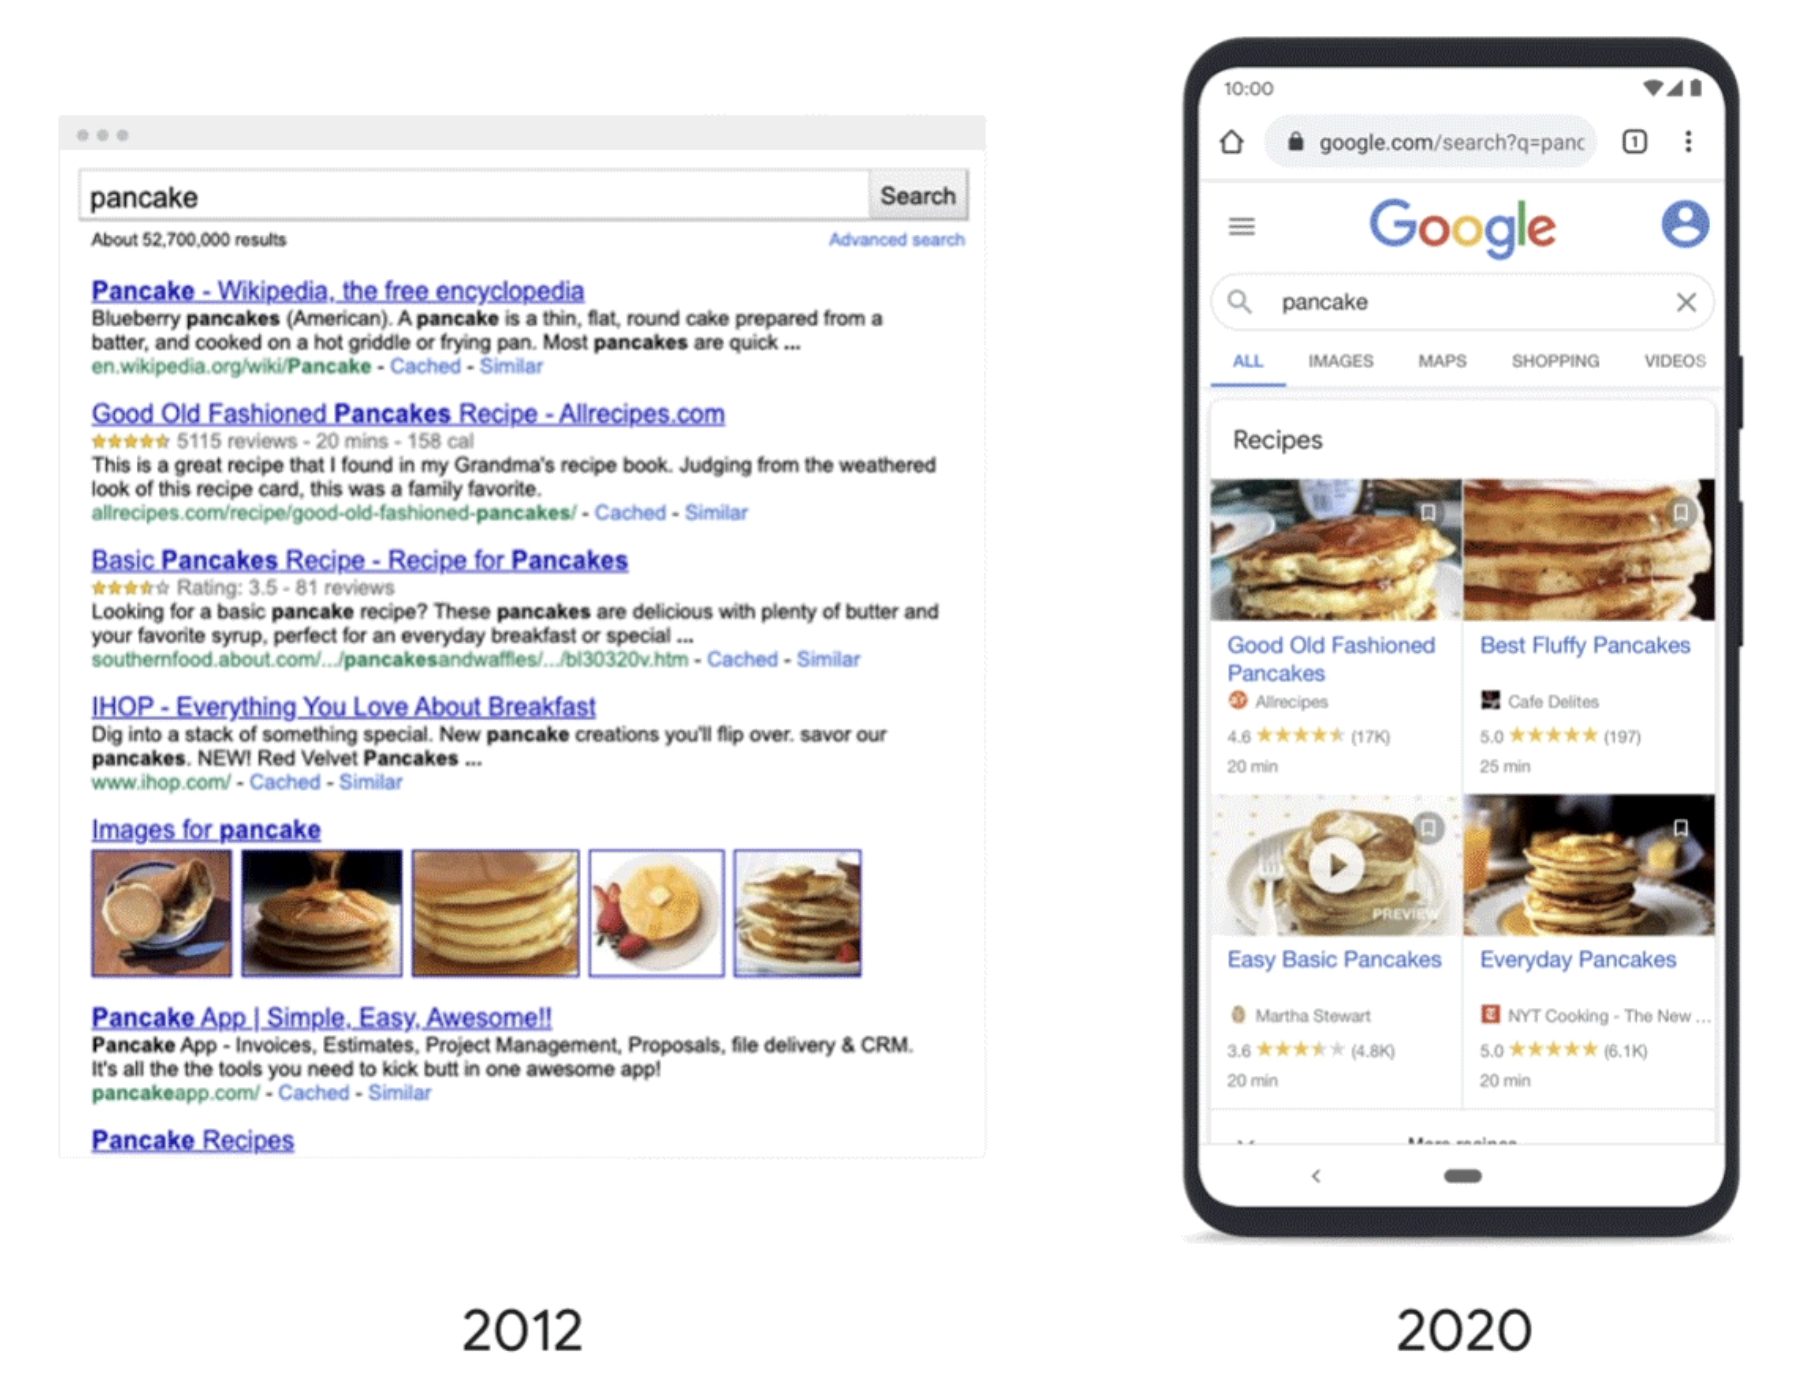 Google Explains How it Organizes Information in Search